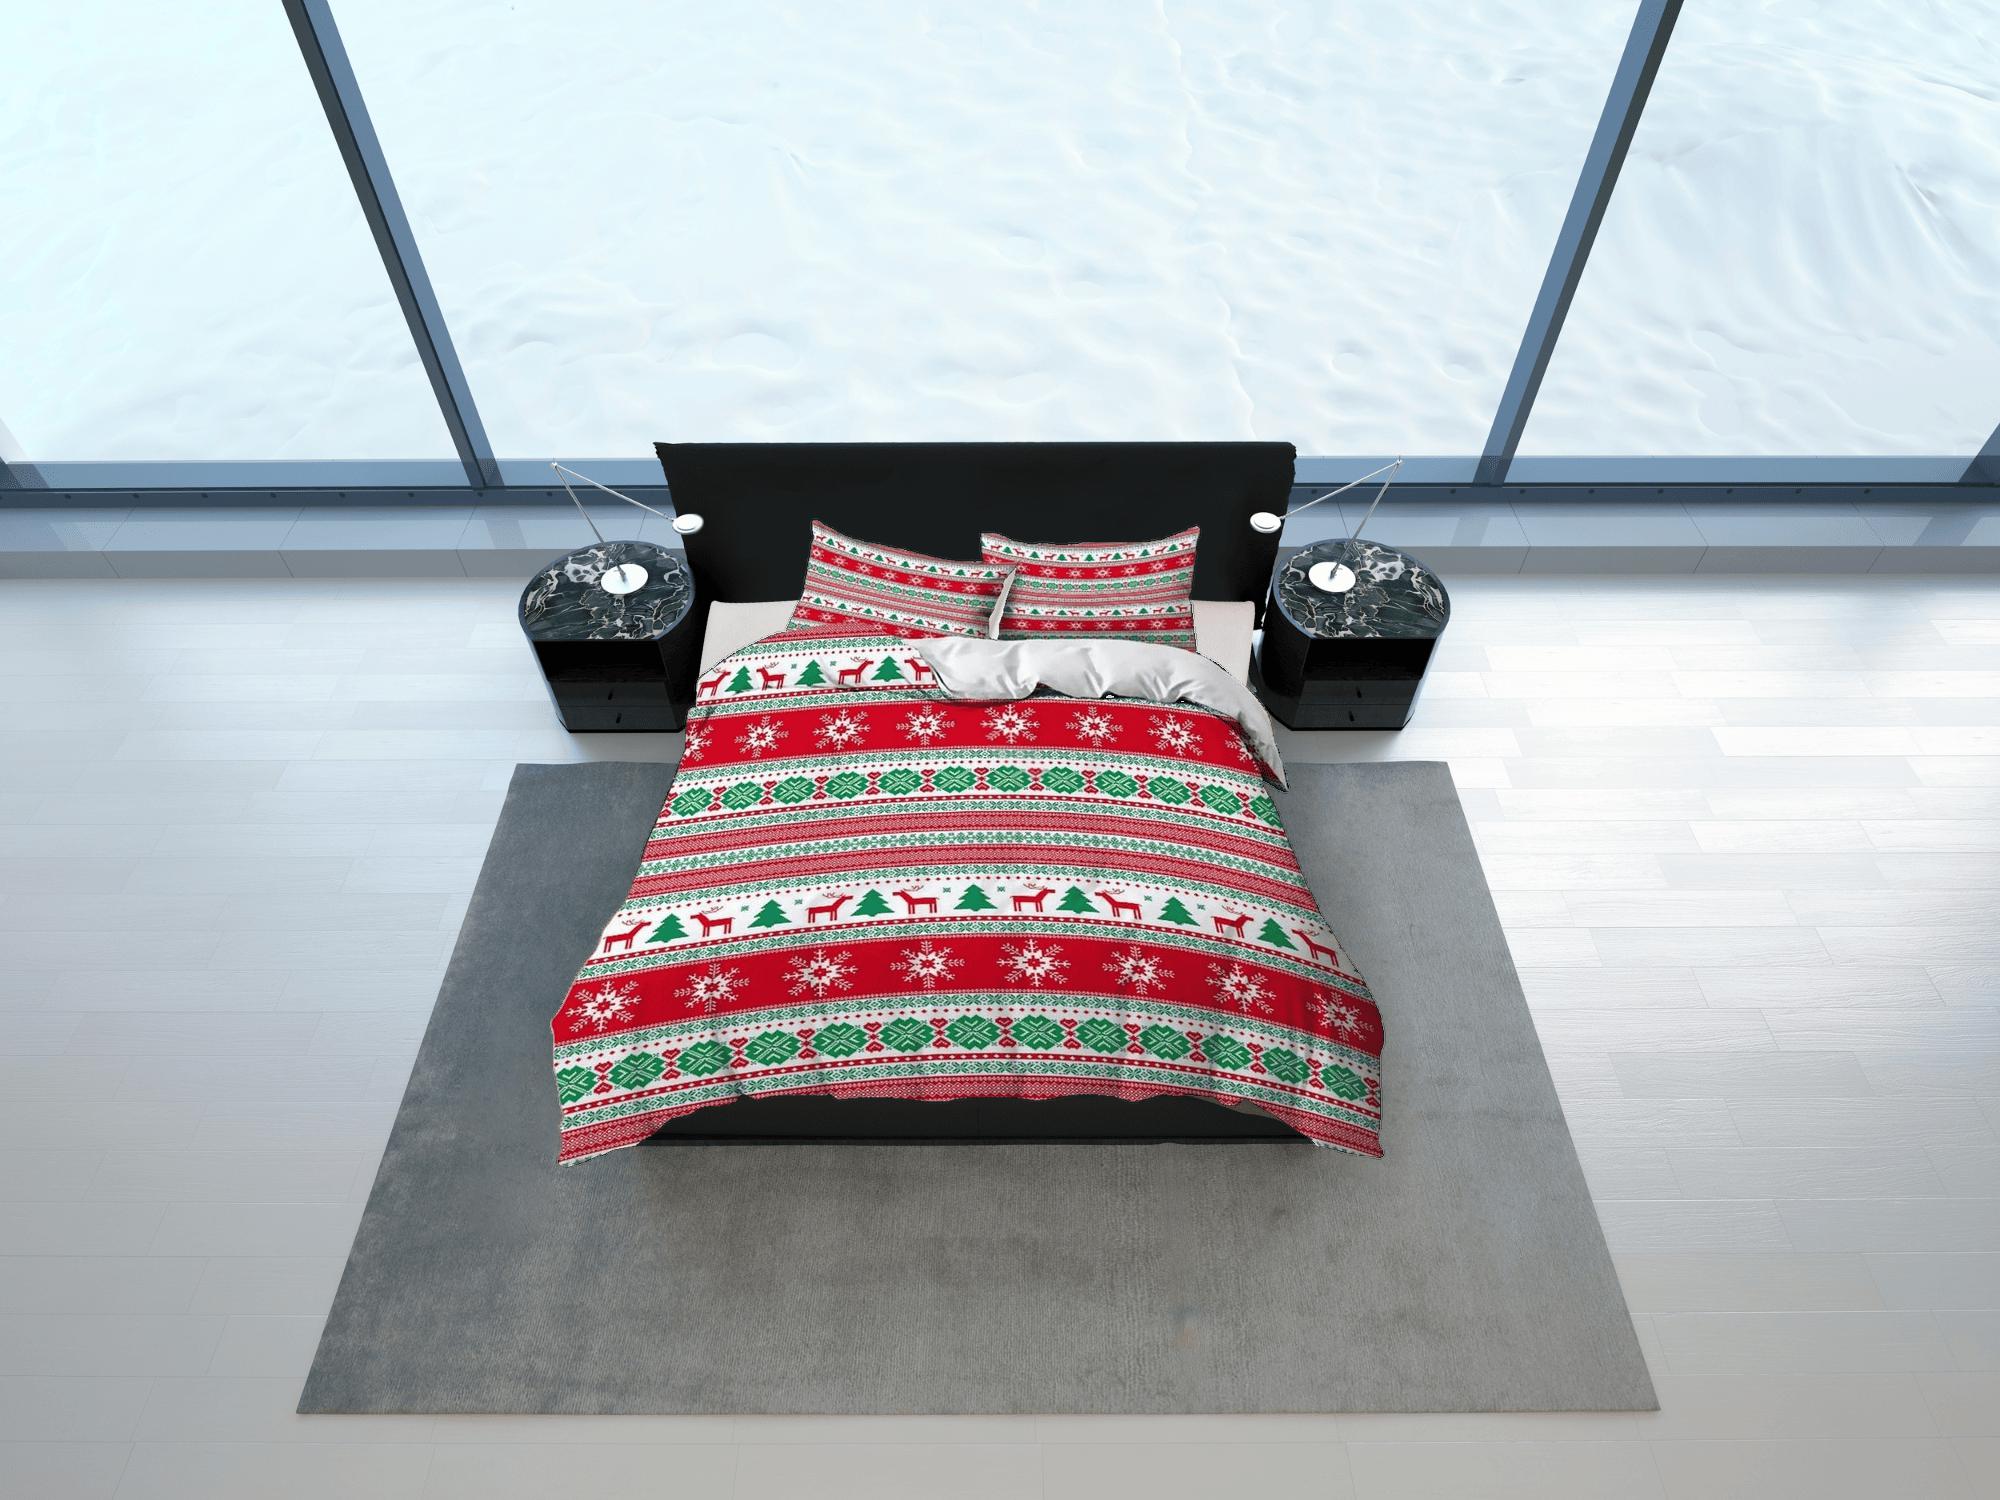 daintyduvet 1950s ugly Christmas sweater inspired bedding & pillowcase holiday gift duvet cover king queen toddler bedding baby Christmas farmhouse